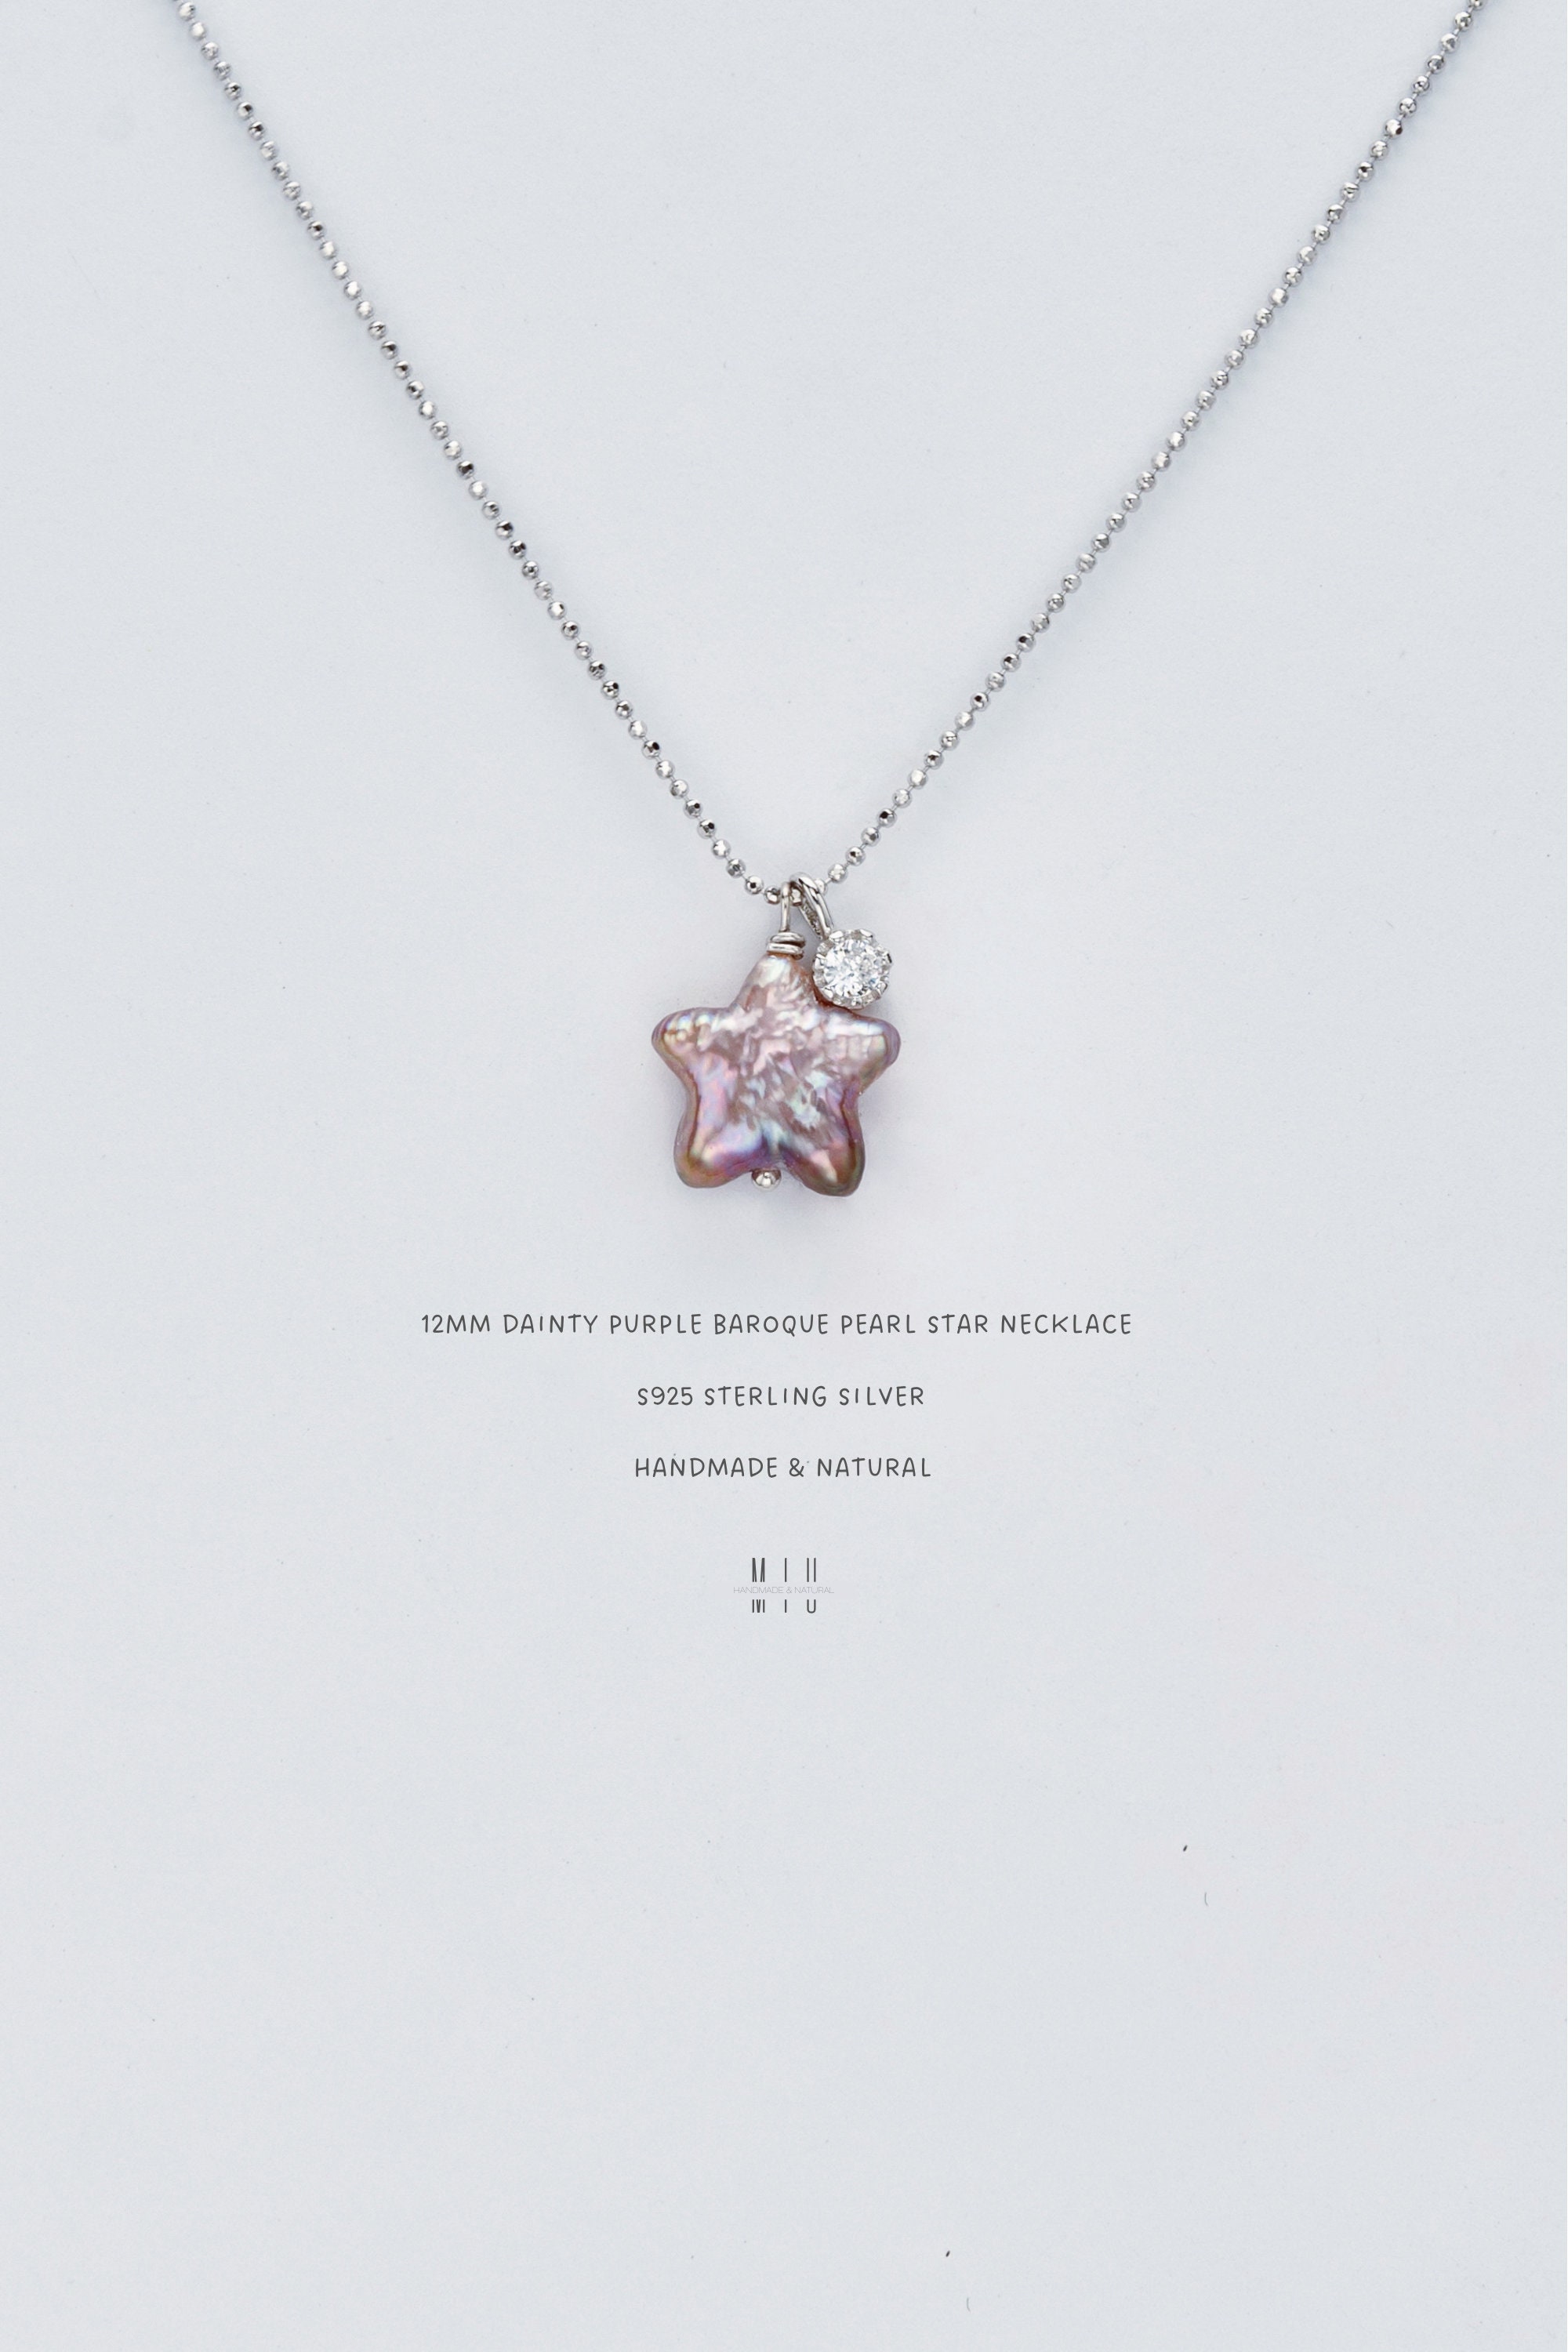 Color Blossom star pendant, pink gold and white mother-of-pearl - Jewelry -  Categories